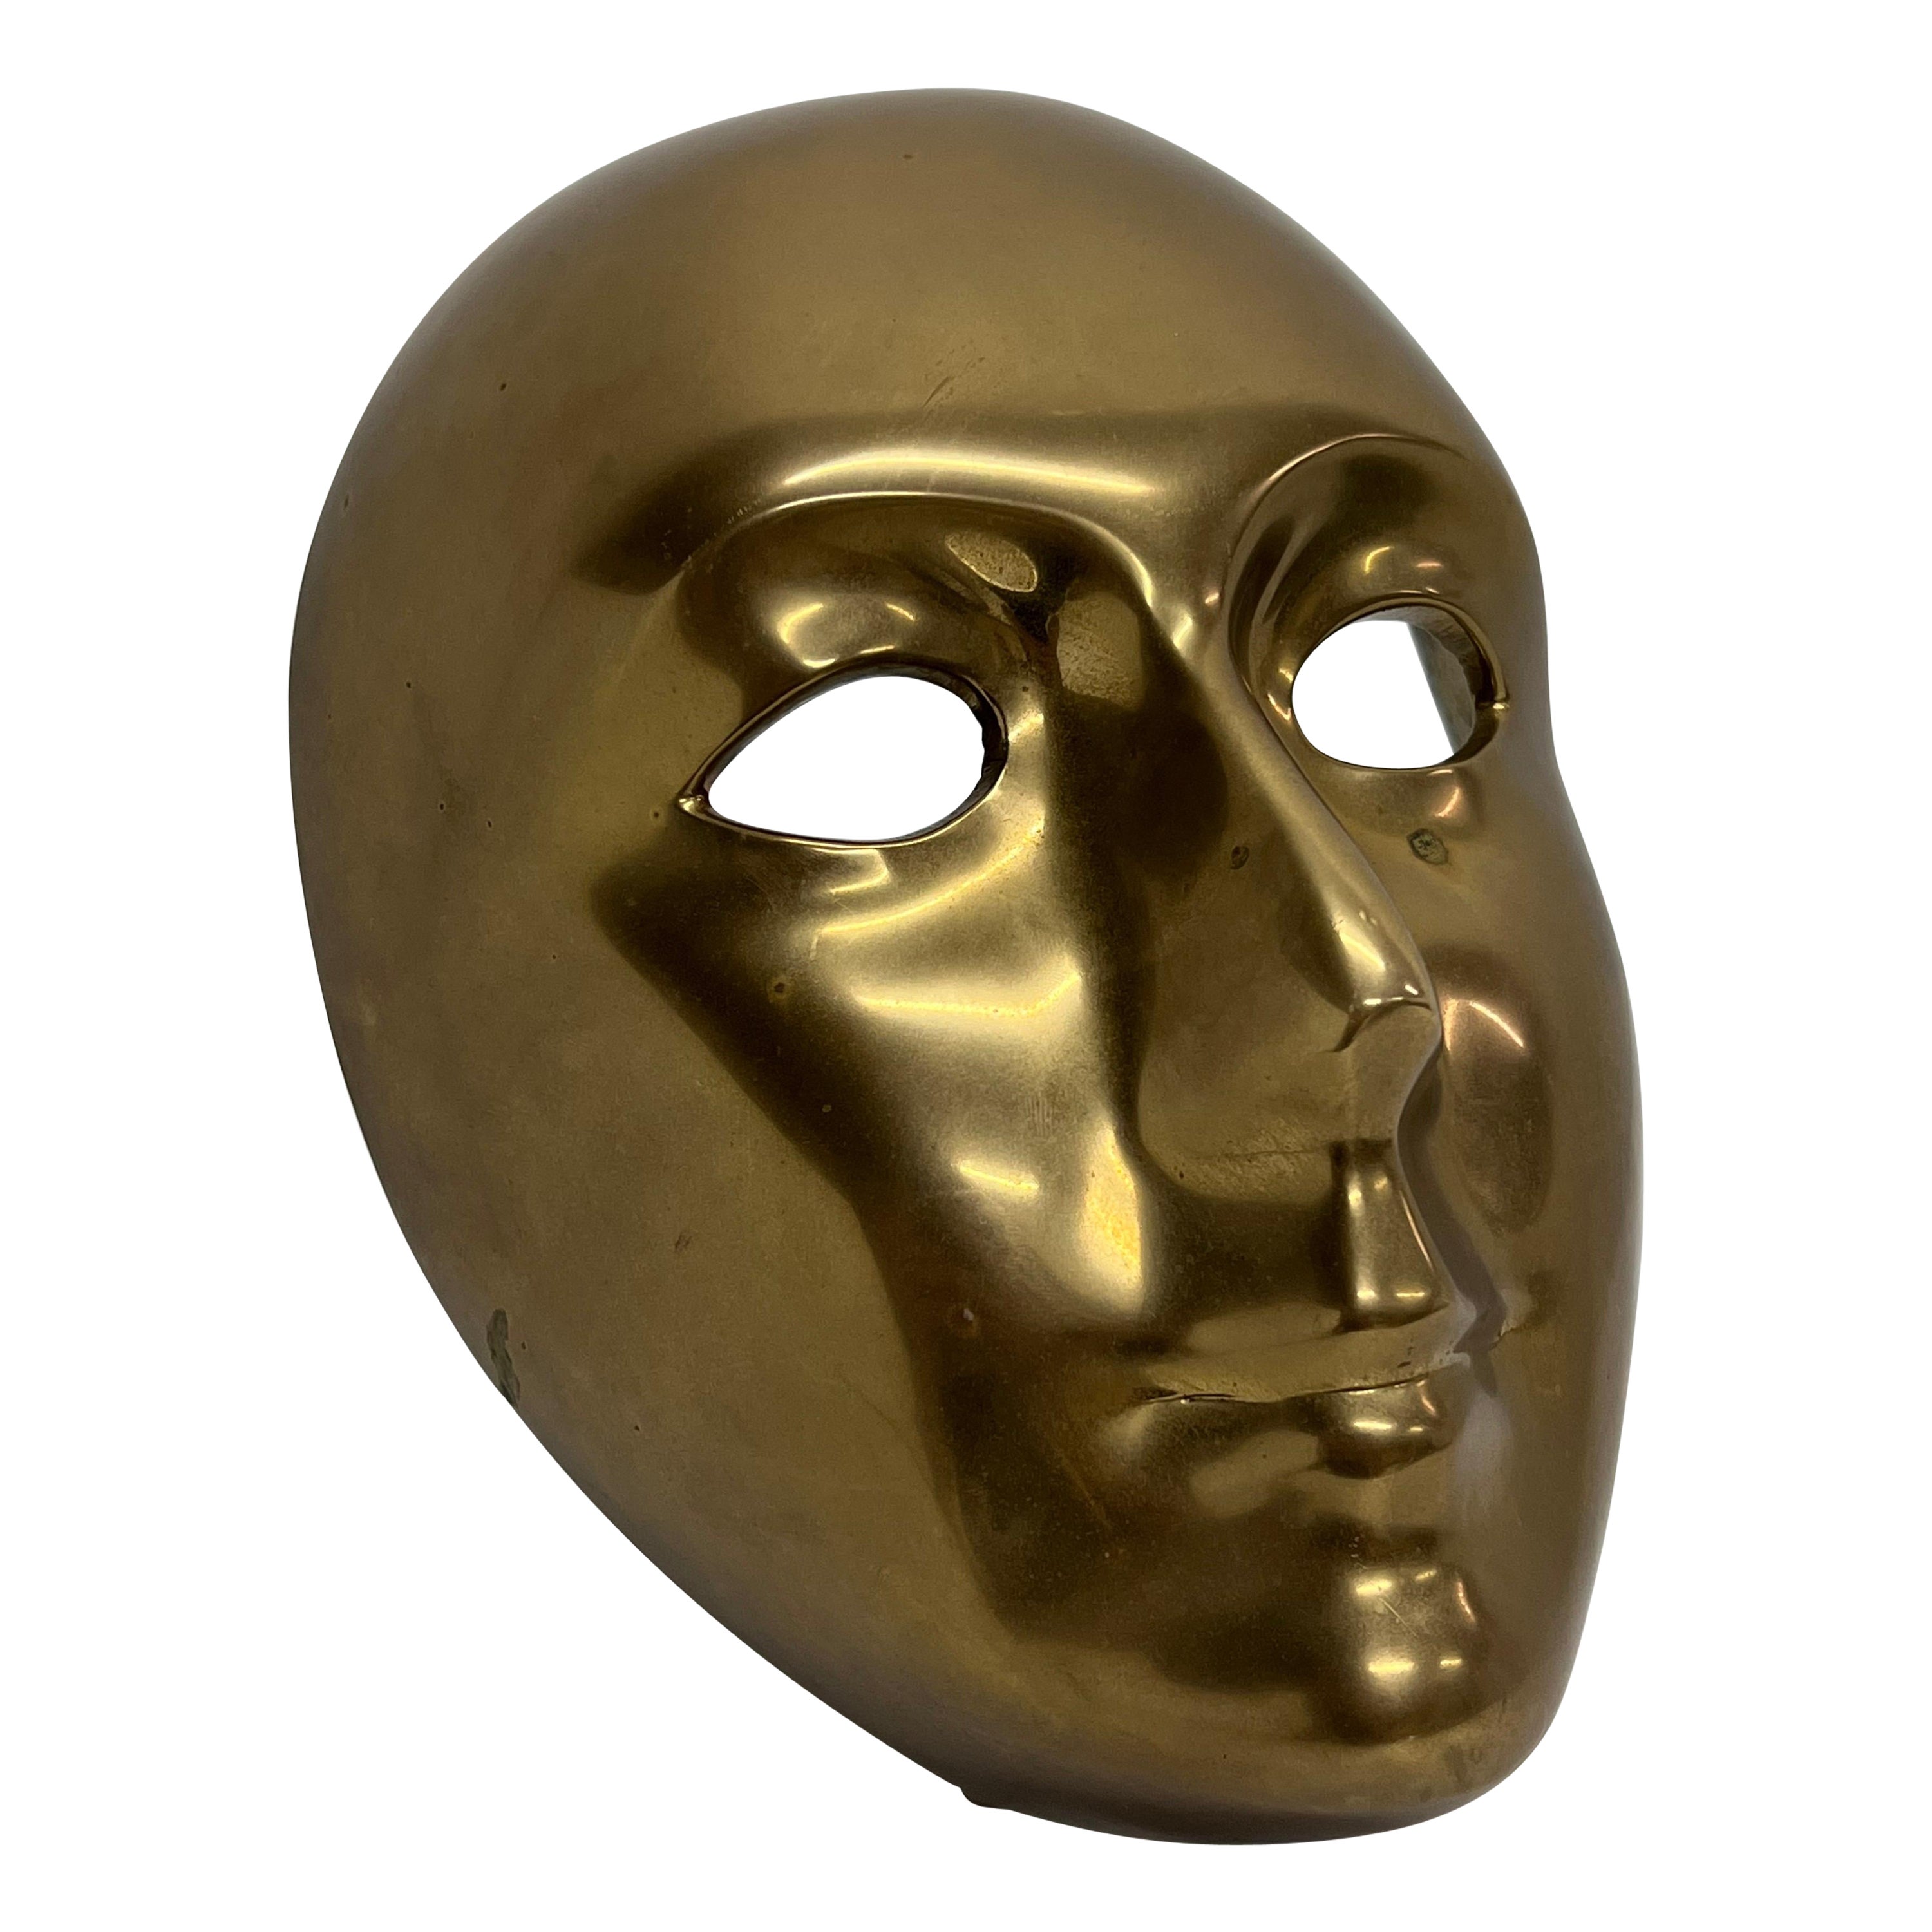 What is the purpose of Venetian masks?